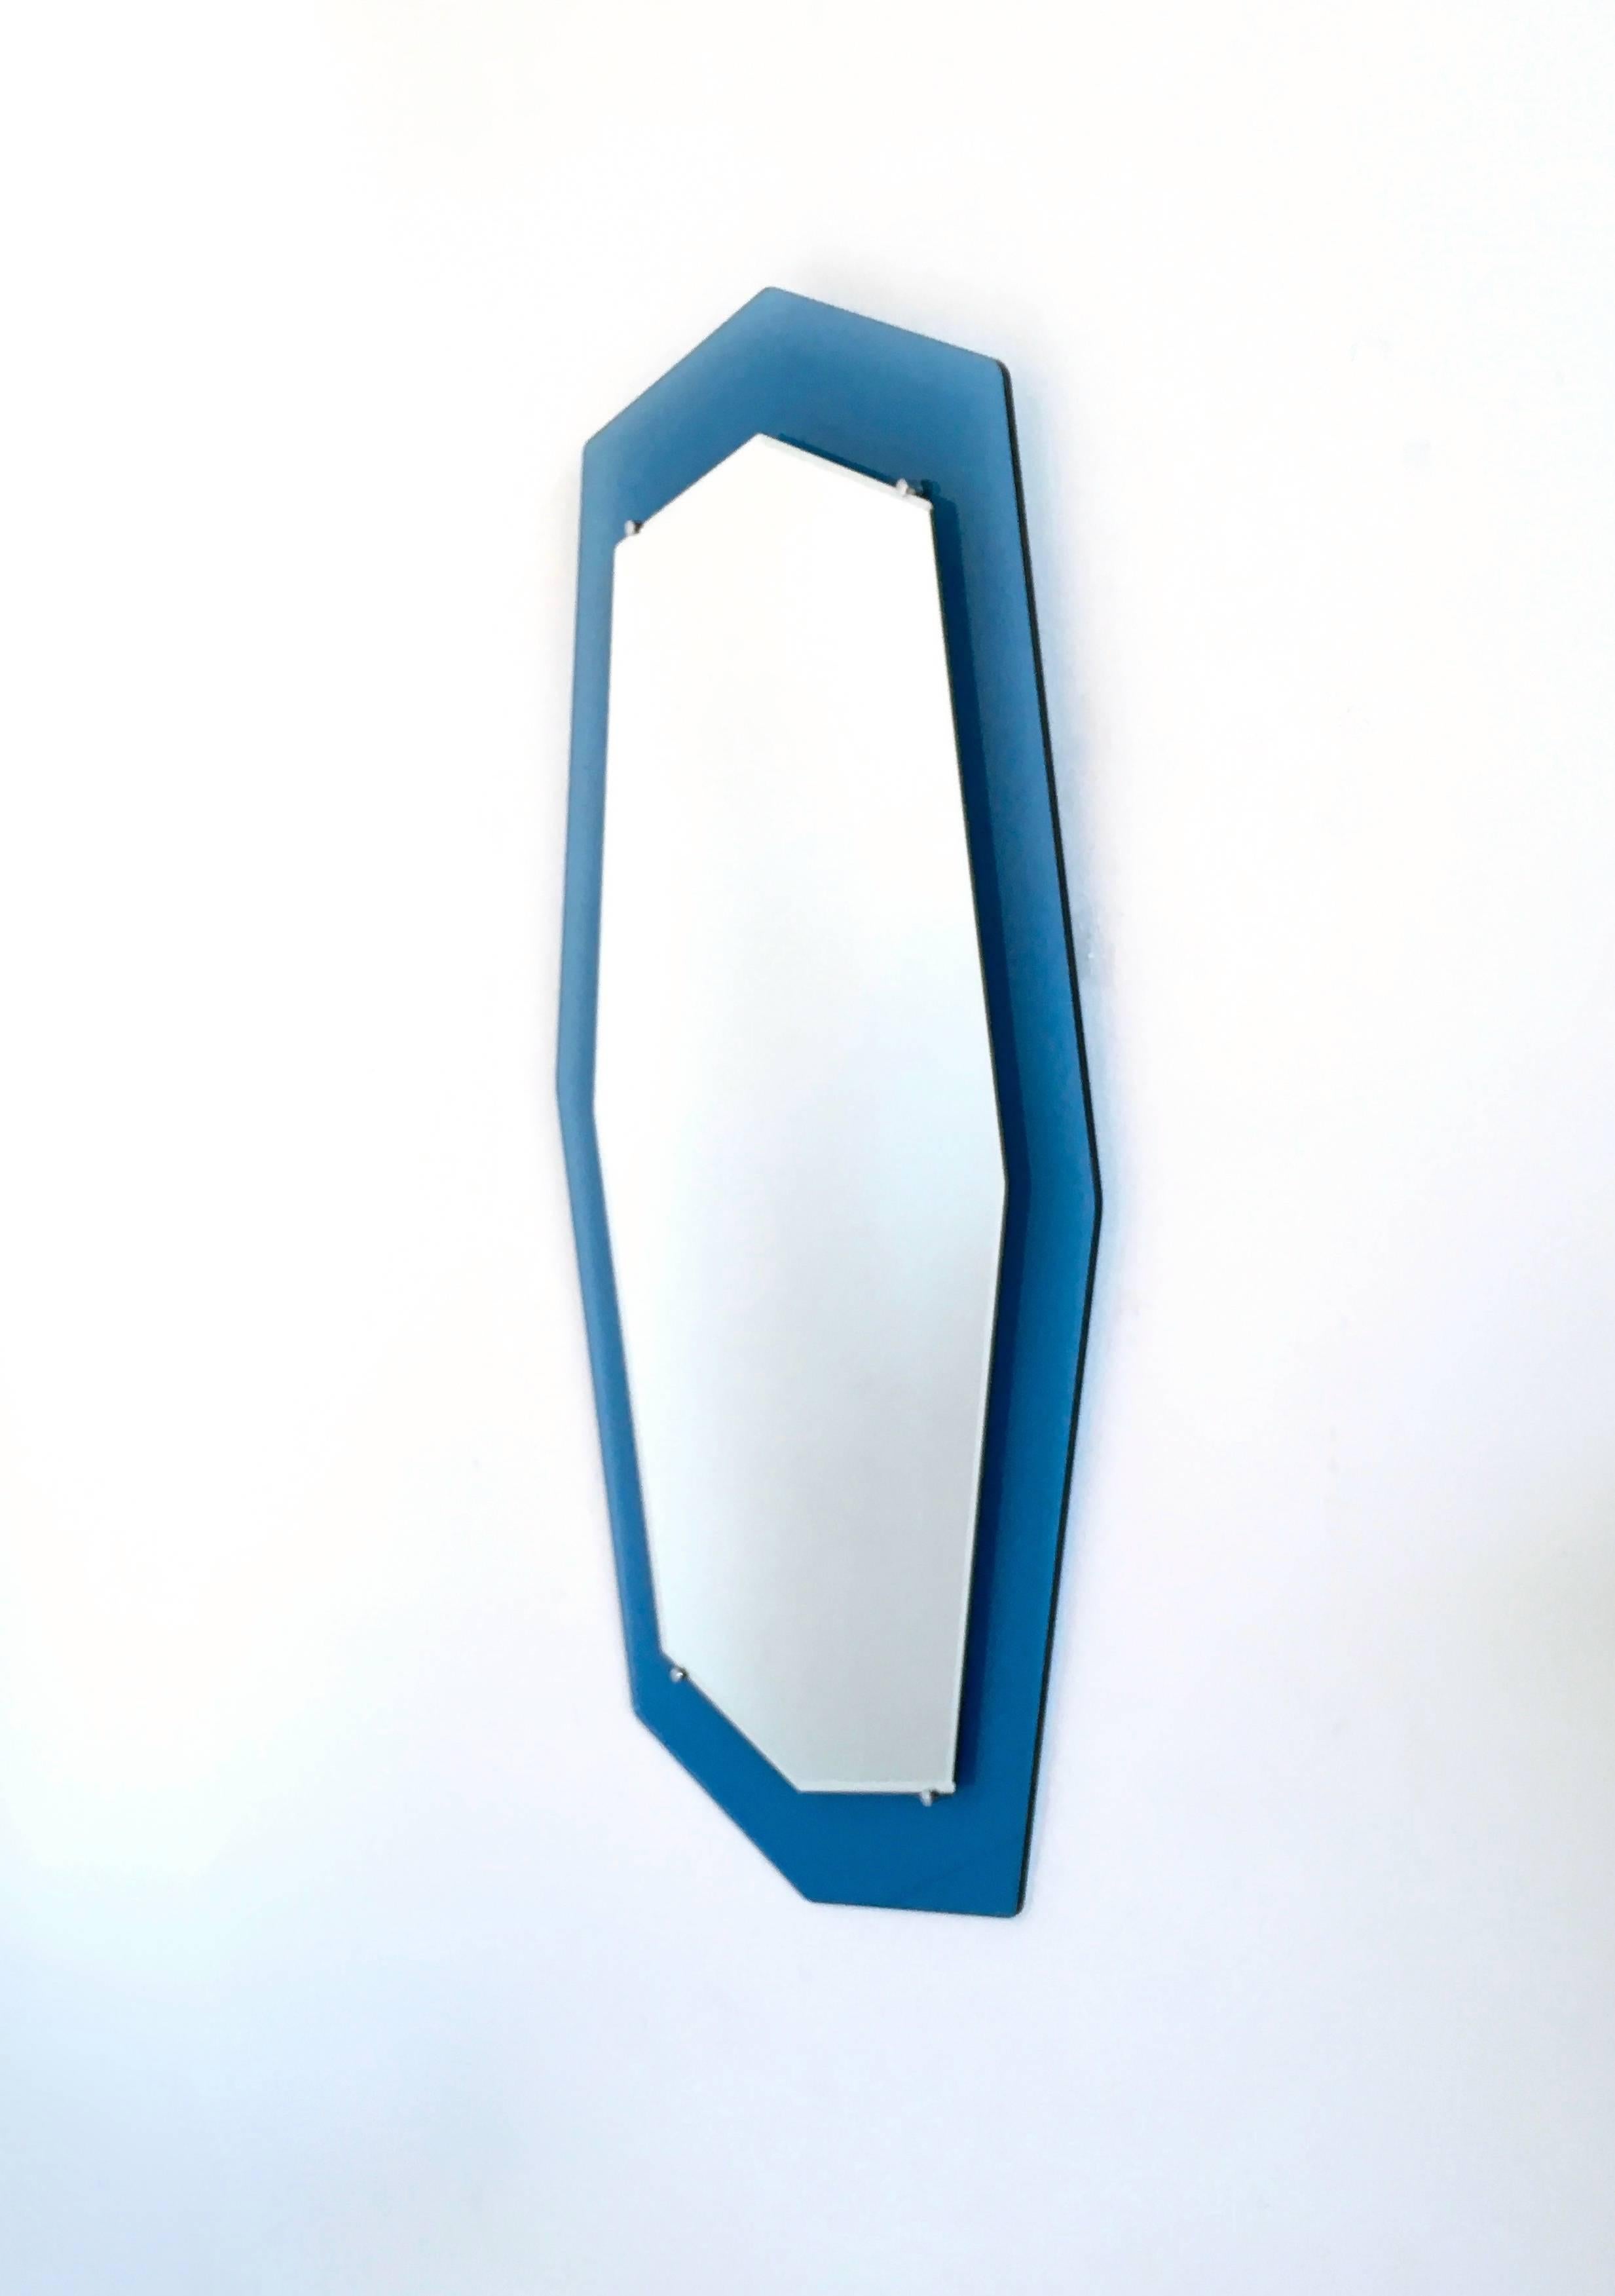 It is made from blue glass and mirror and has chromed metal parts. 
Produced by Italo900.
It is a unique piece so this gives it the fascination of distinctiveness.
 